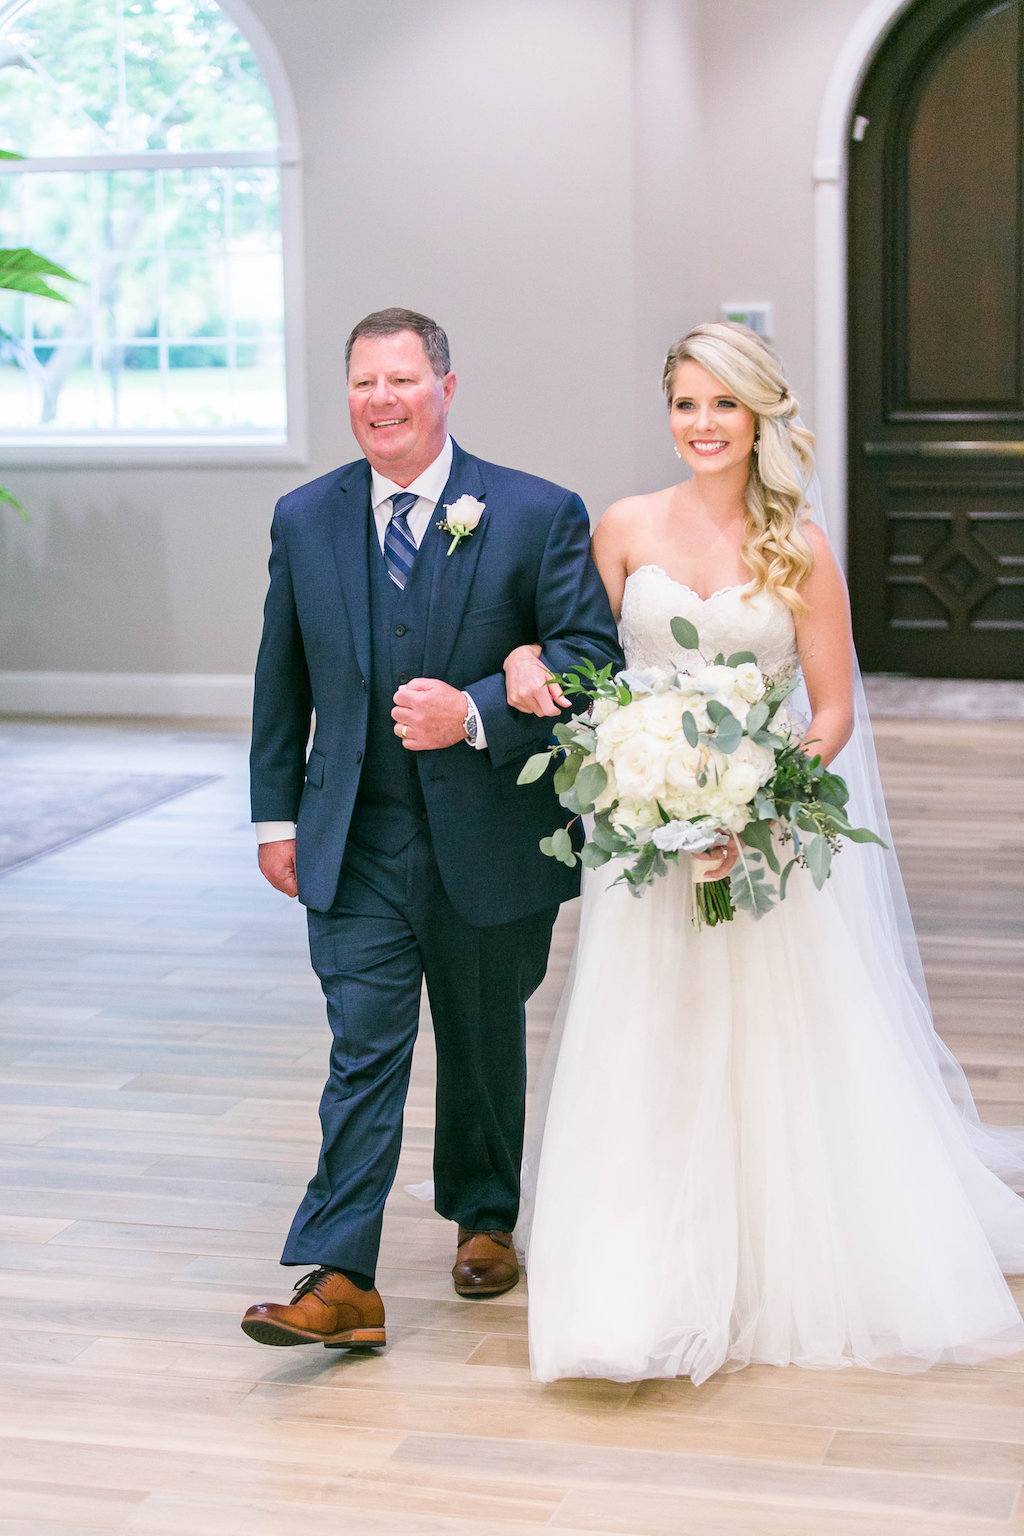 Bride and Father Walking Down the Aisle at Wedding | Clearwater Wedding Ceremony Venue Harborside Chapel